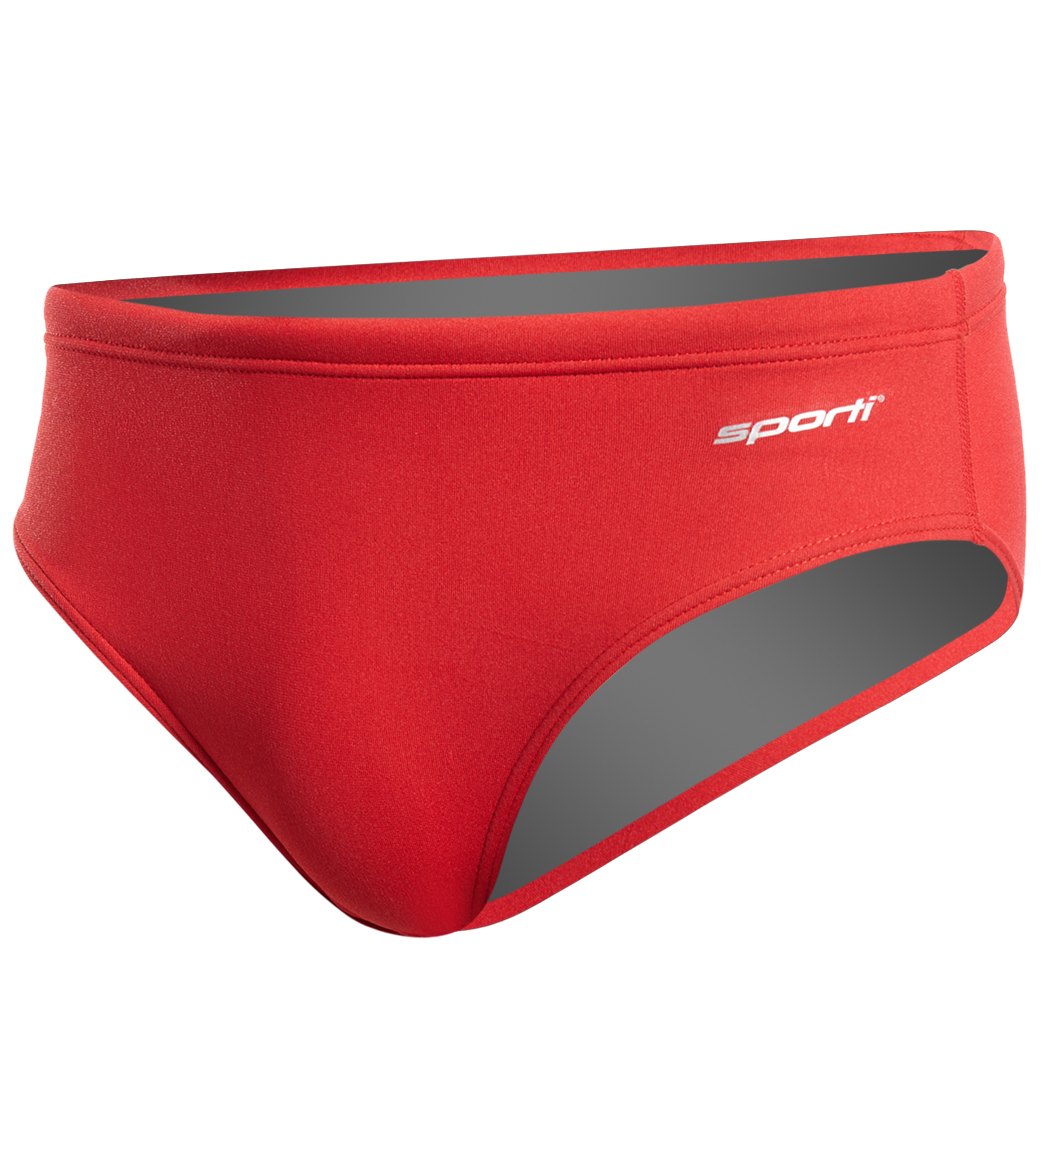 Sporti HydroLast Solid Brief Swimsuit Youth (22-28)